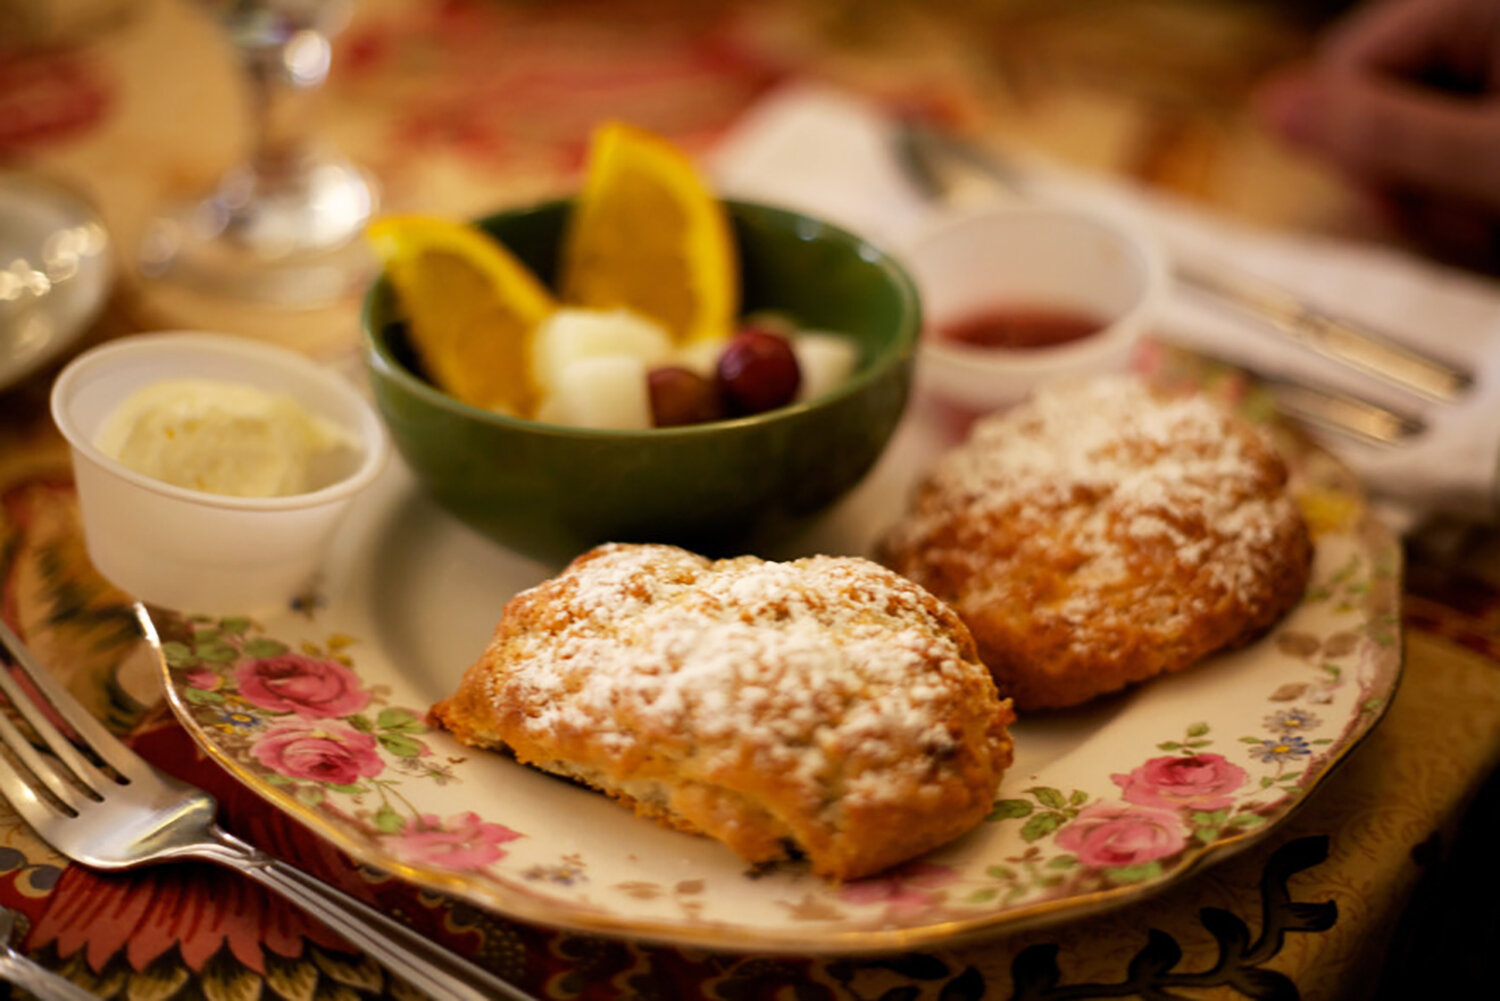  Delicious scones topped with powdered sugar and served with cream and jam! 